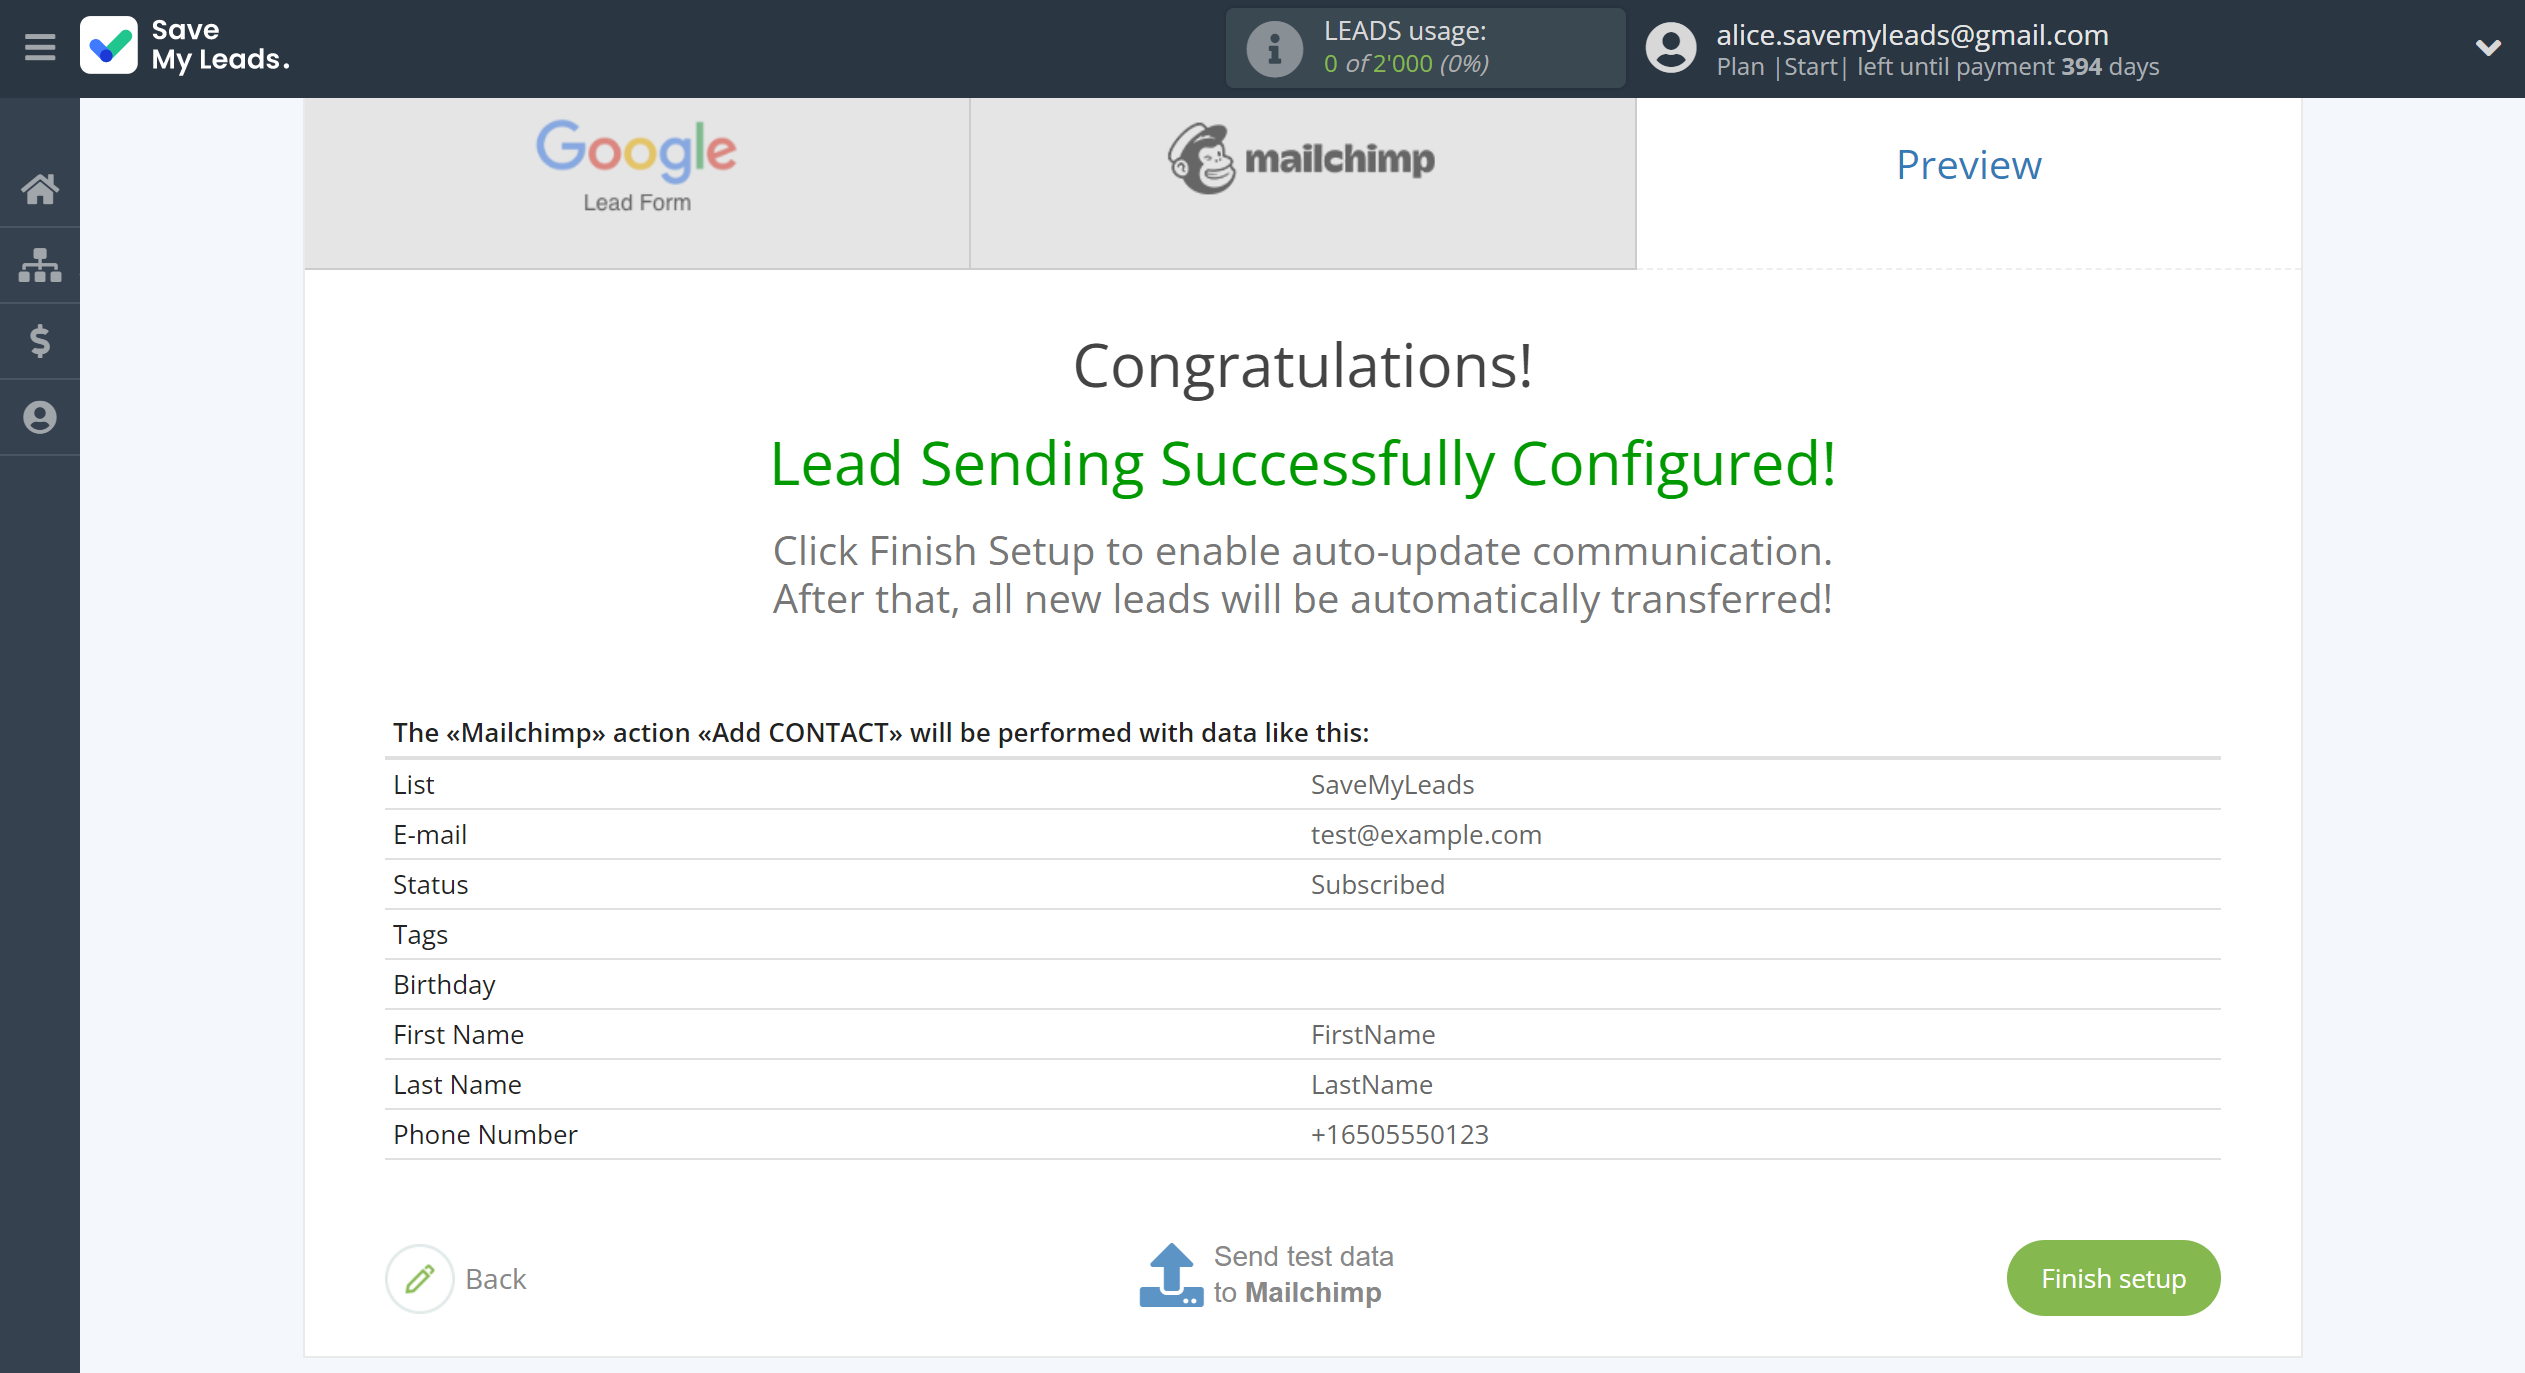 How to Connect Google Lead Form with MailChimp | Test data